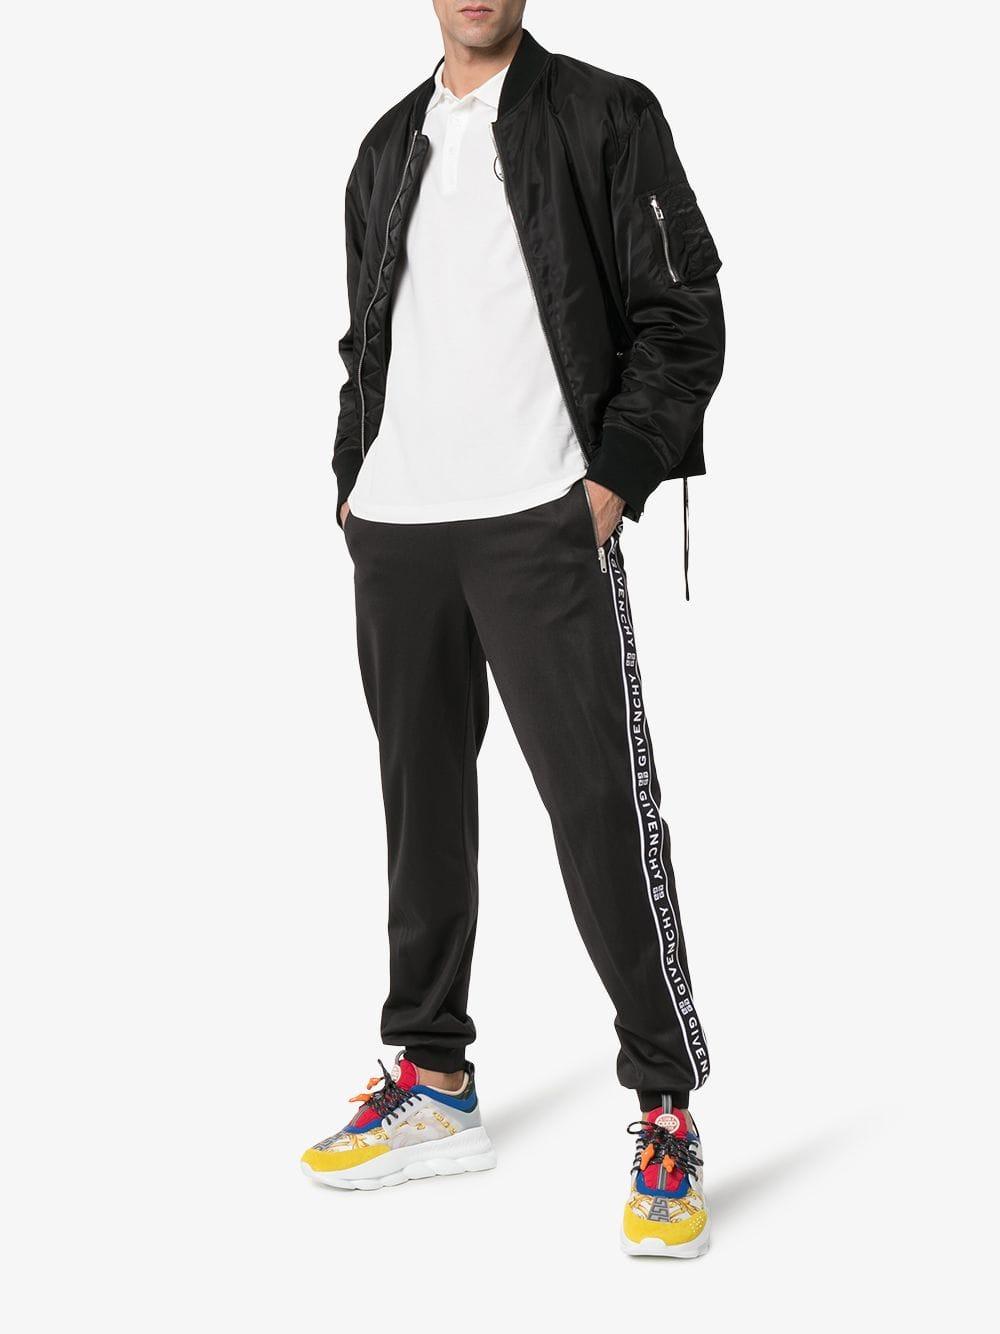 Givenchy Synthetic Logo Stripe Track Pants Black for Men - Lyst